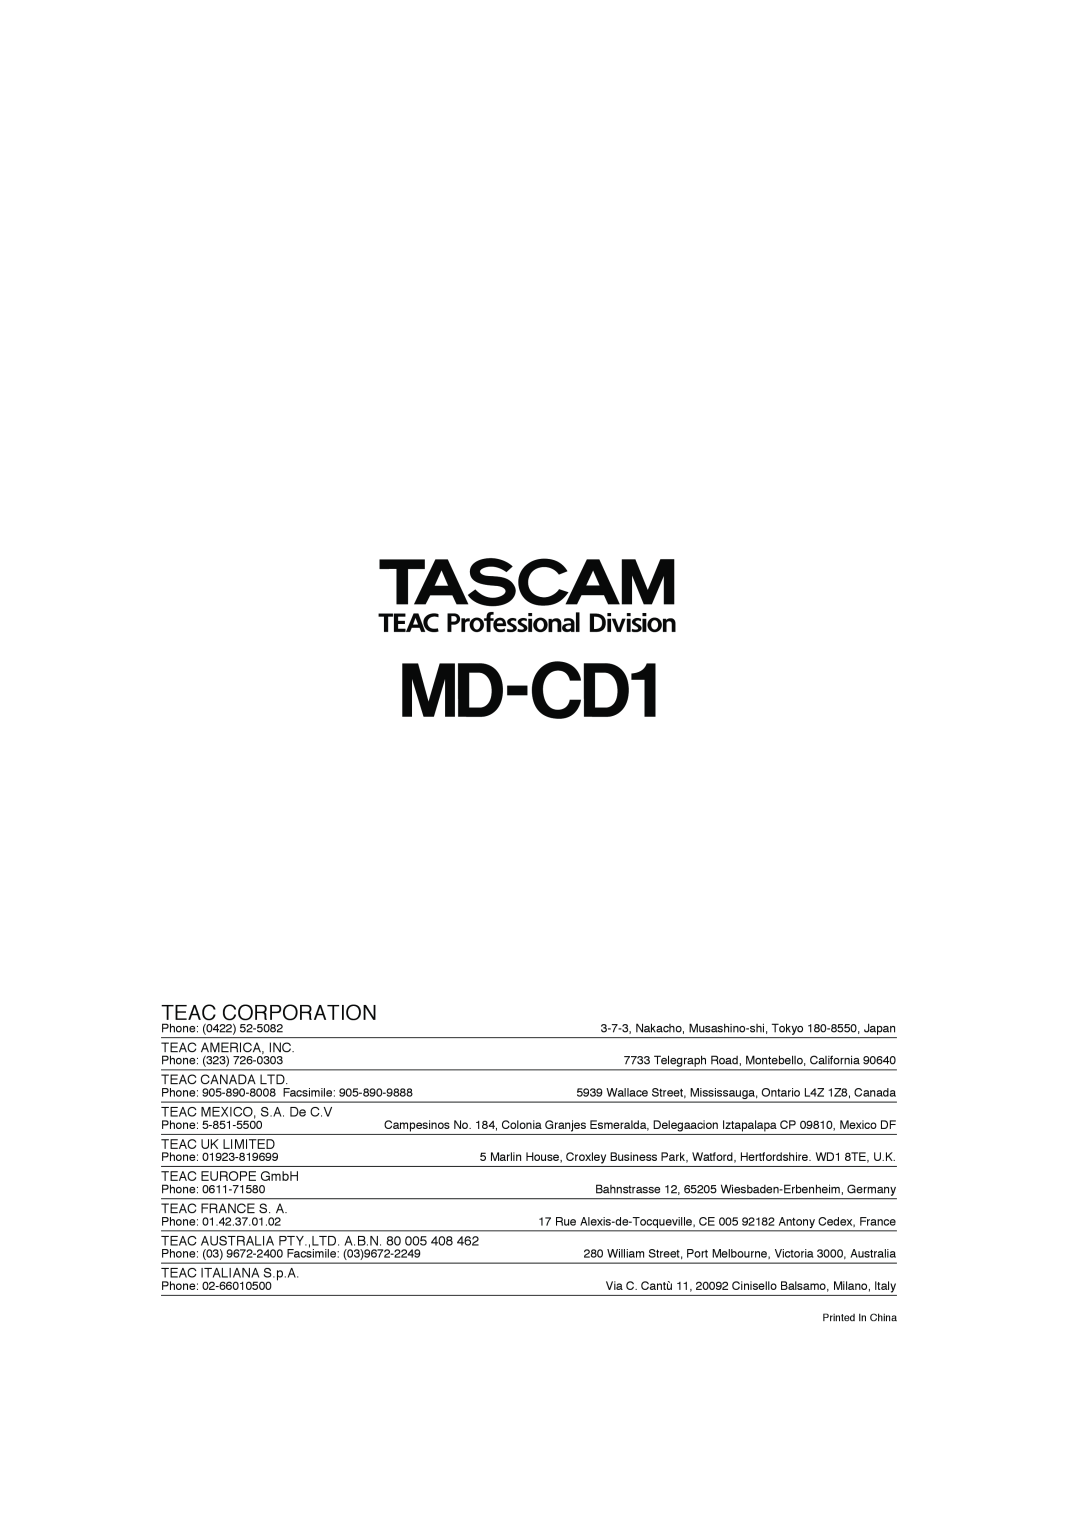 Tascam MD-CD1 owner manual Teac Corporation 